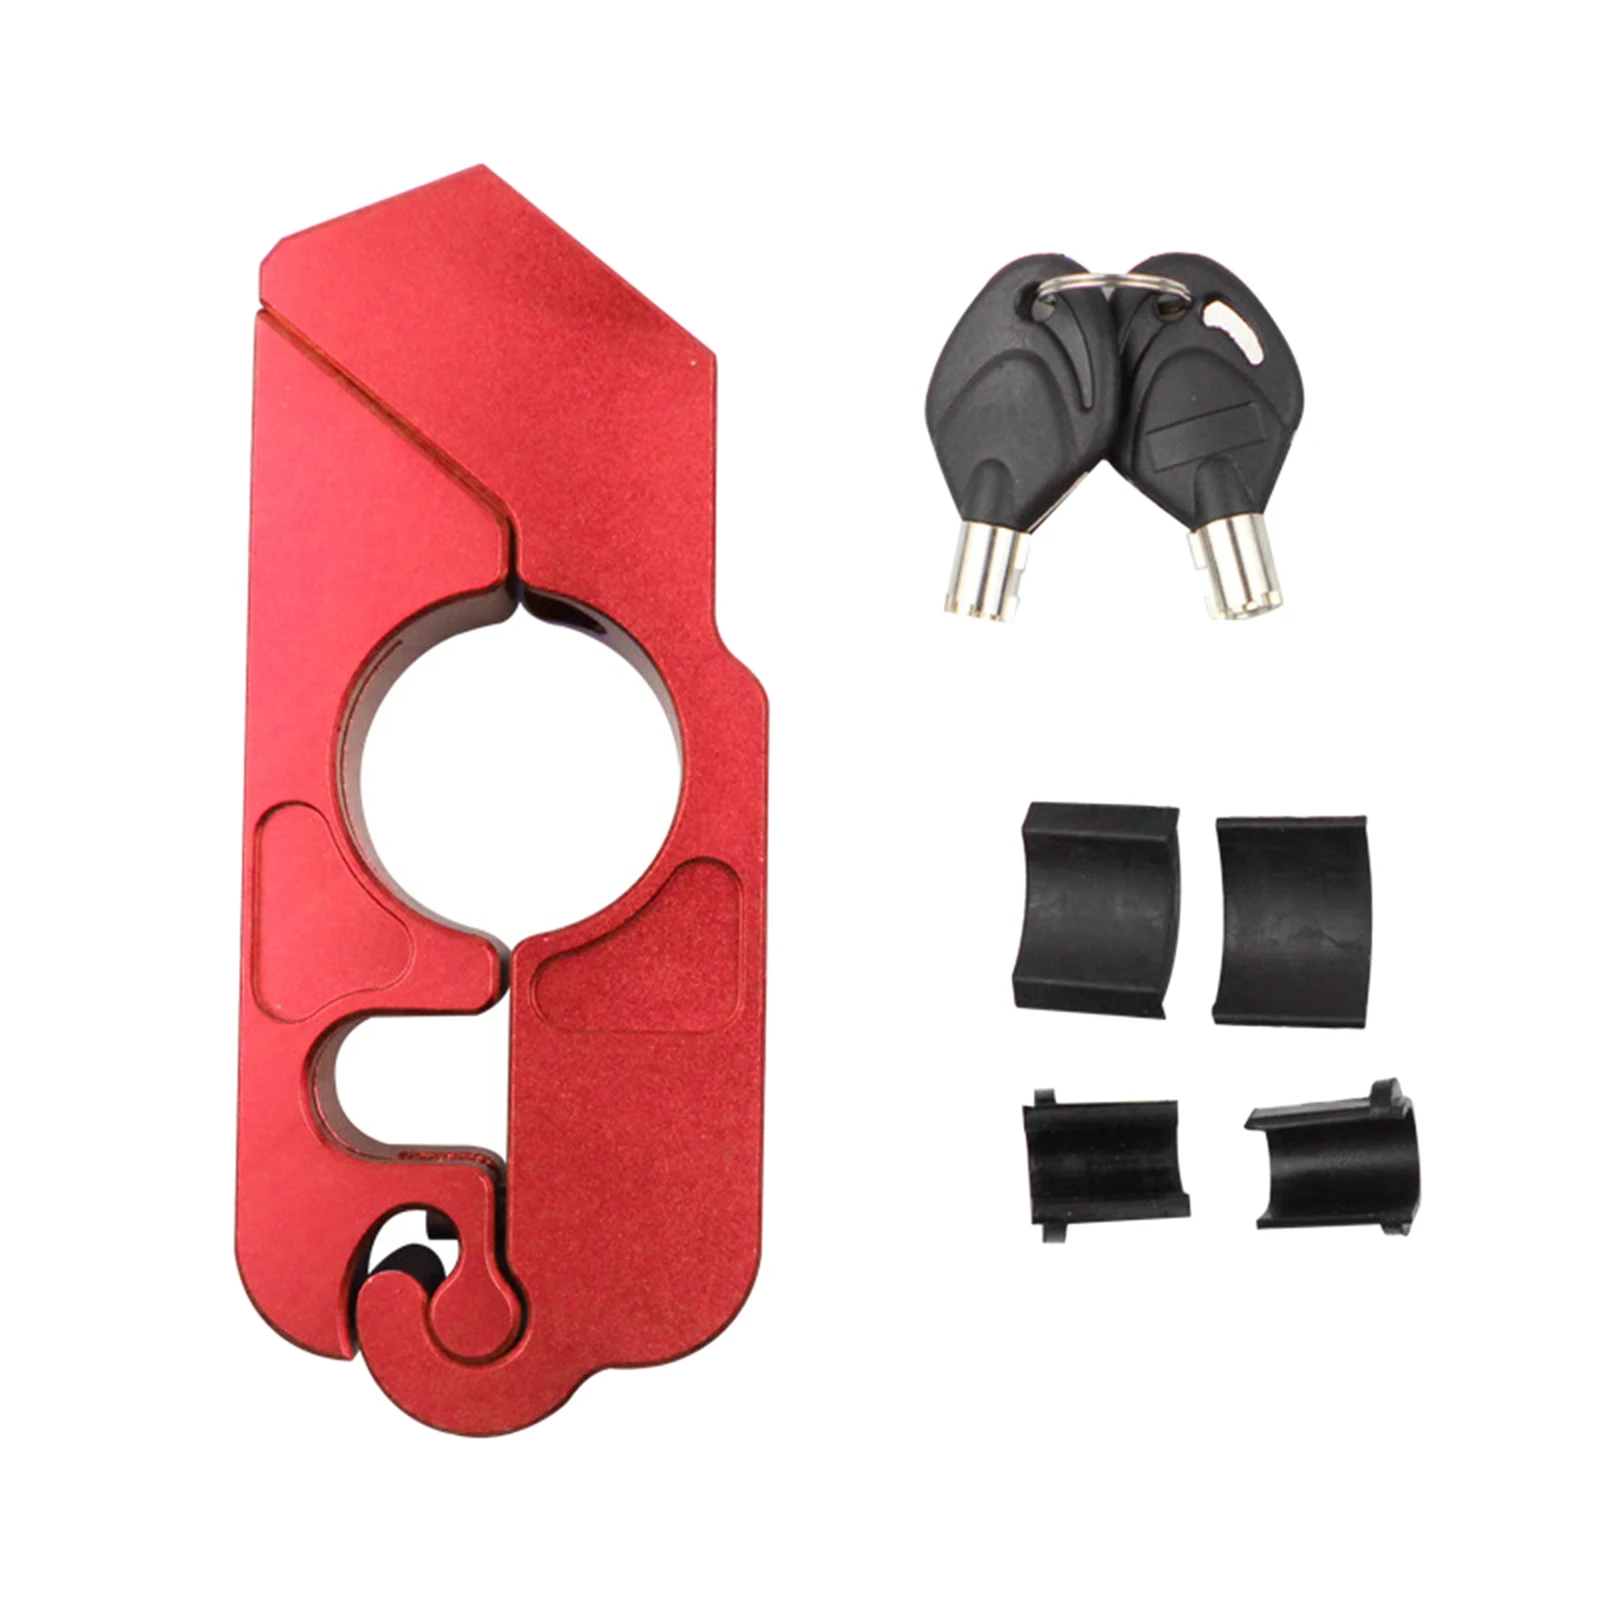 Motorcycle Lock Handlebar Lock Throttle Lock For protection Motorcycle handlebar grips Secure Your Motorcycle